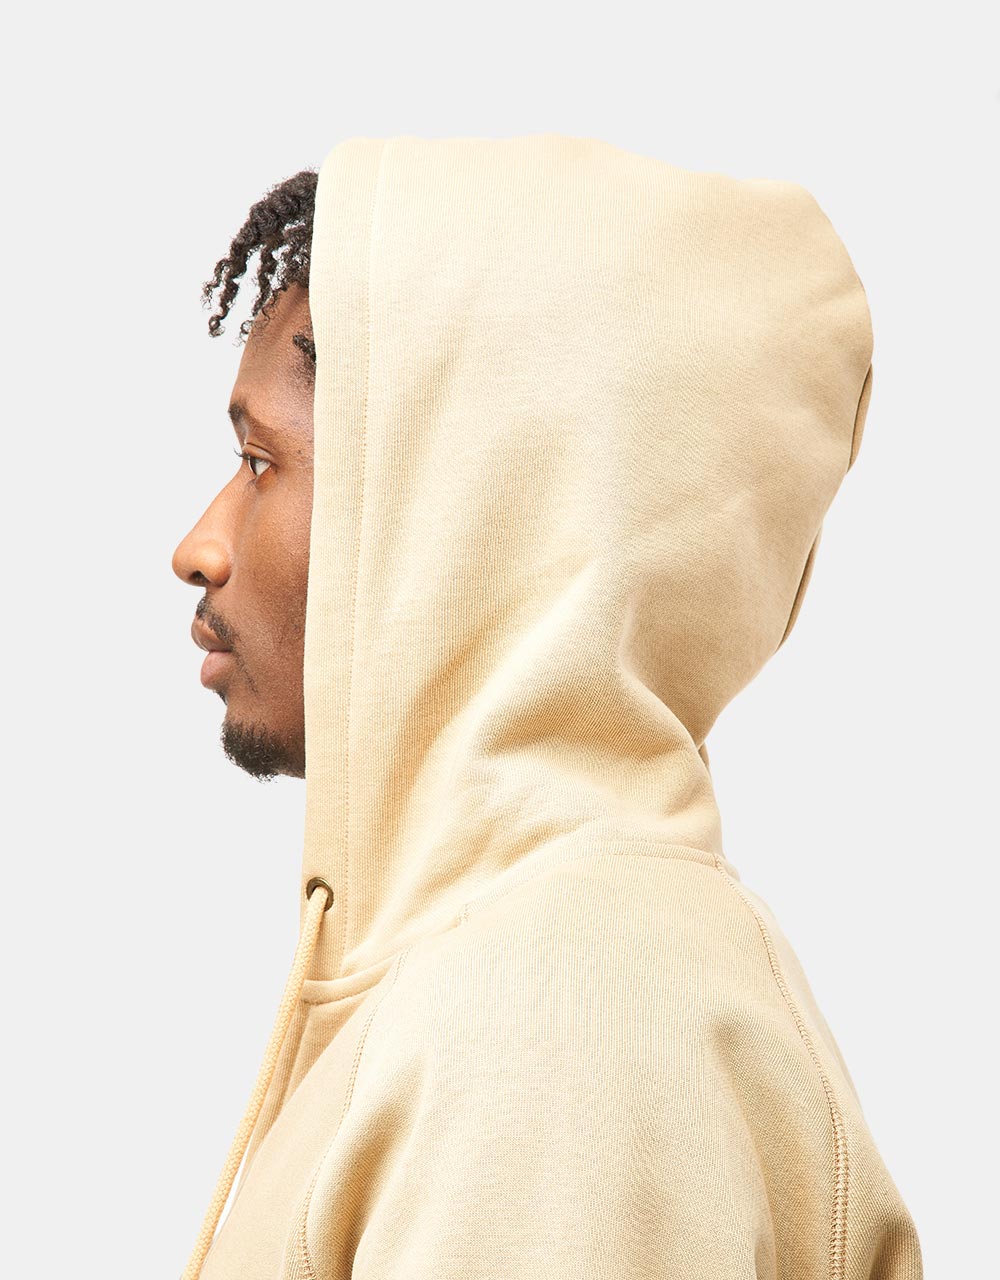 Carhartt WIP Hooded Chase Jacket - Sable/Gold